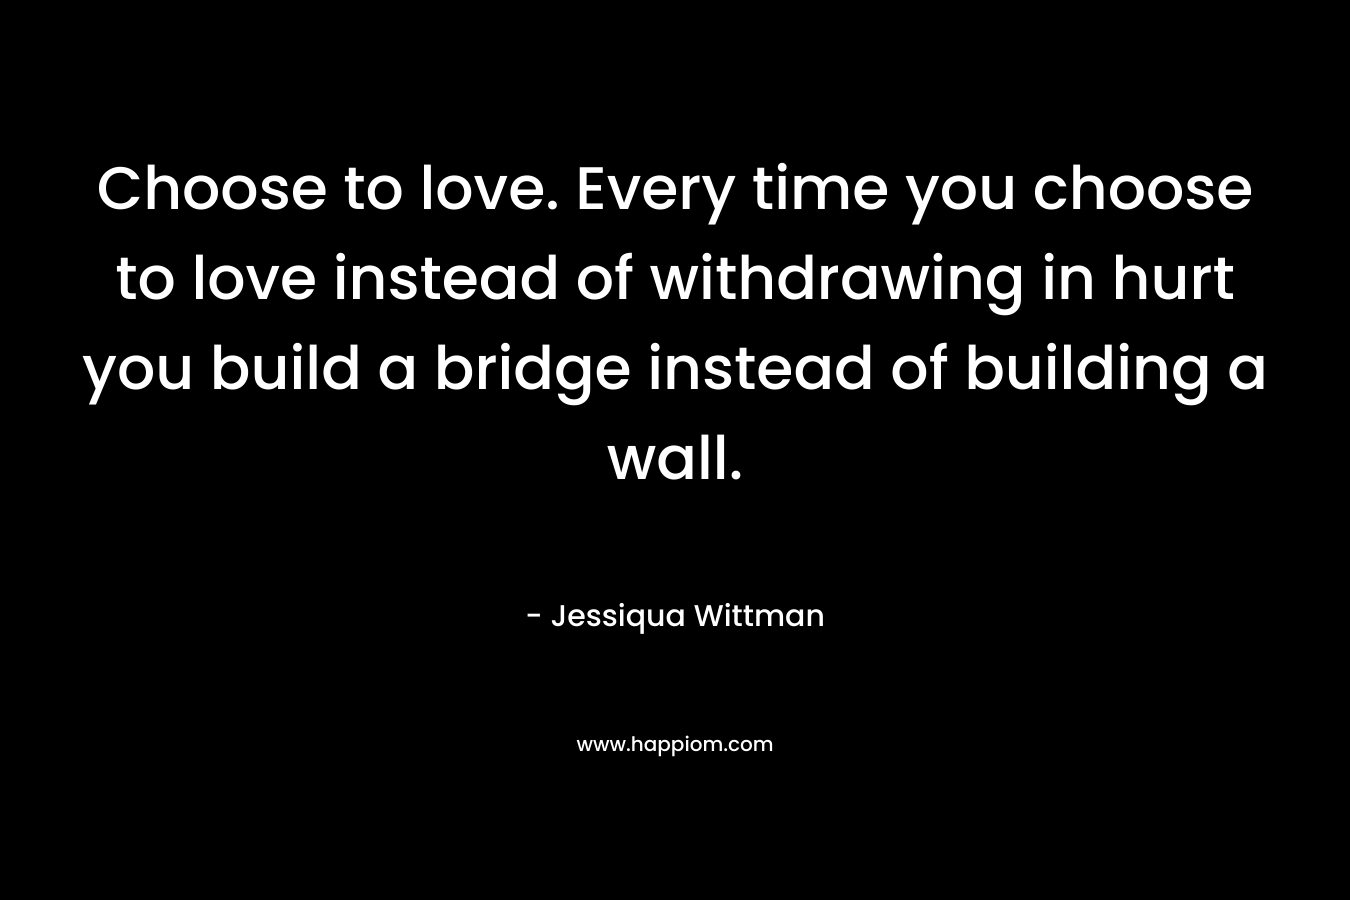 Choose to love. Every time you choose to love instead of withdrawing in hurt you build a bridge instead of building a wall.